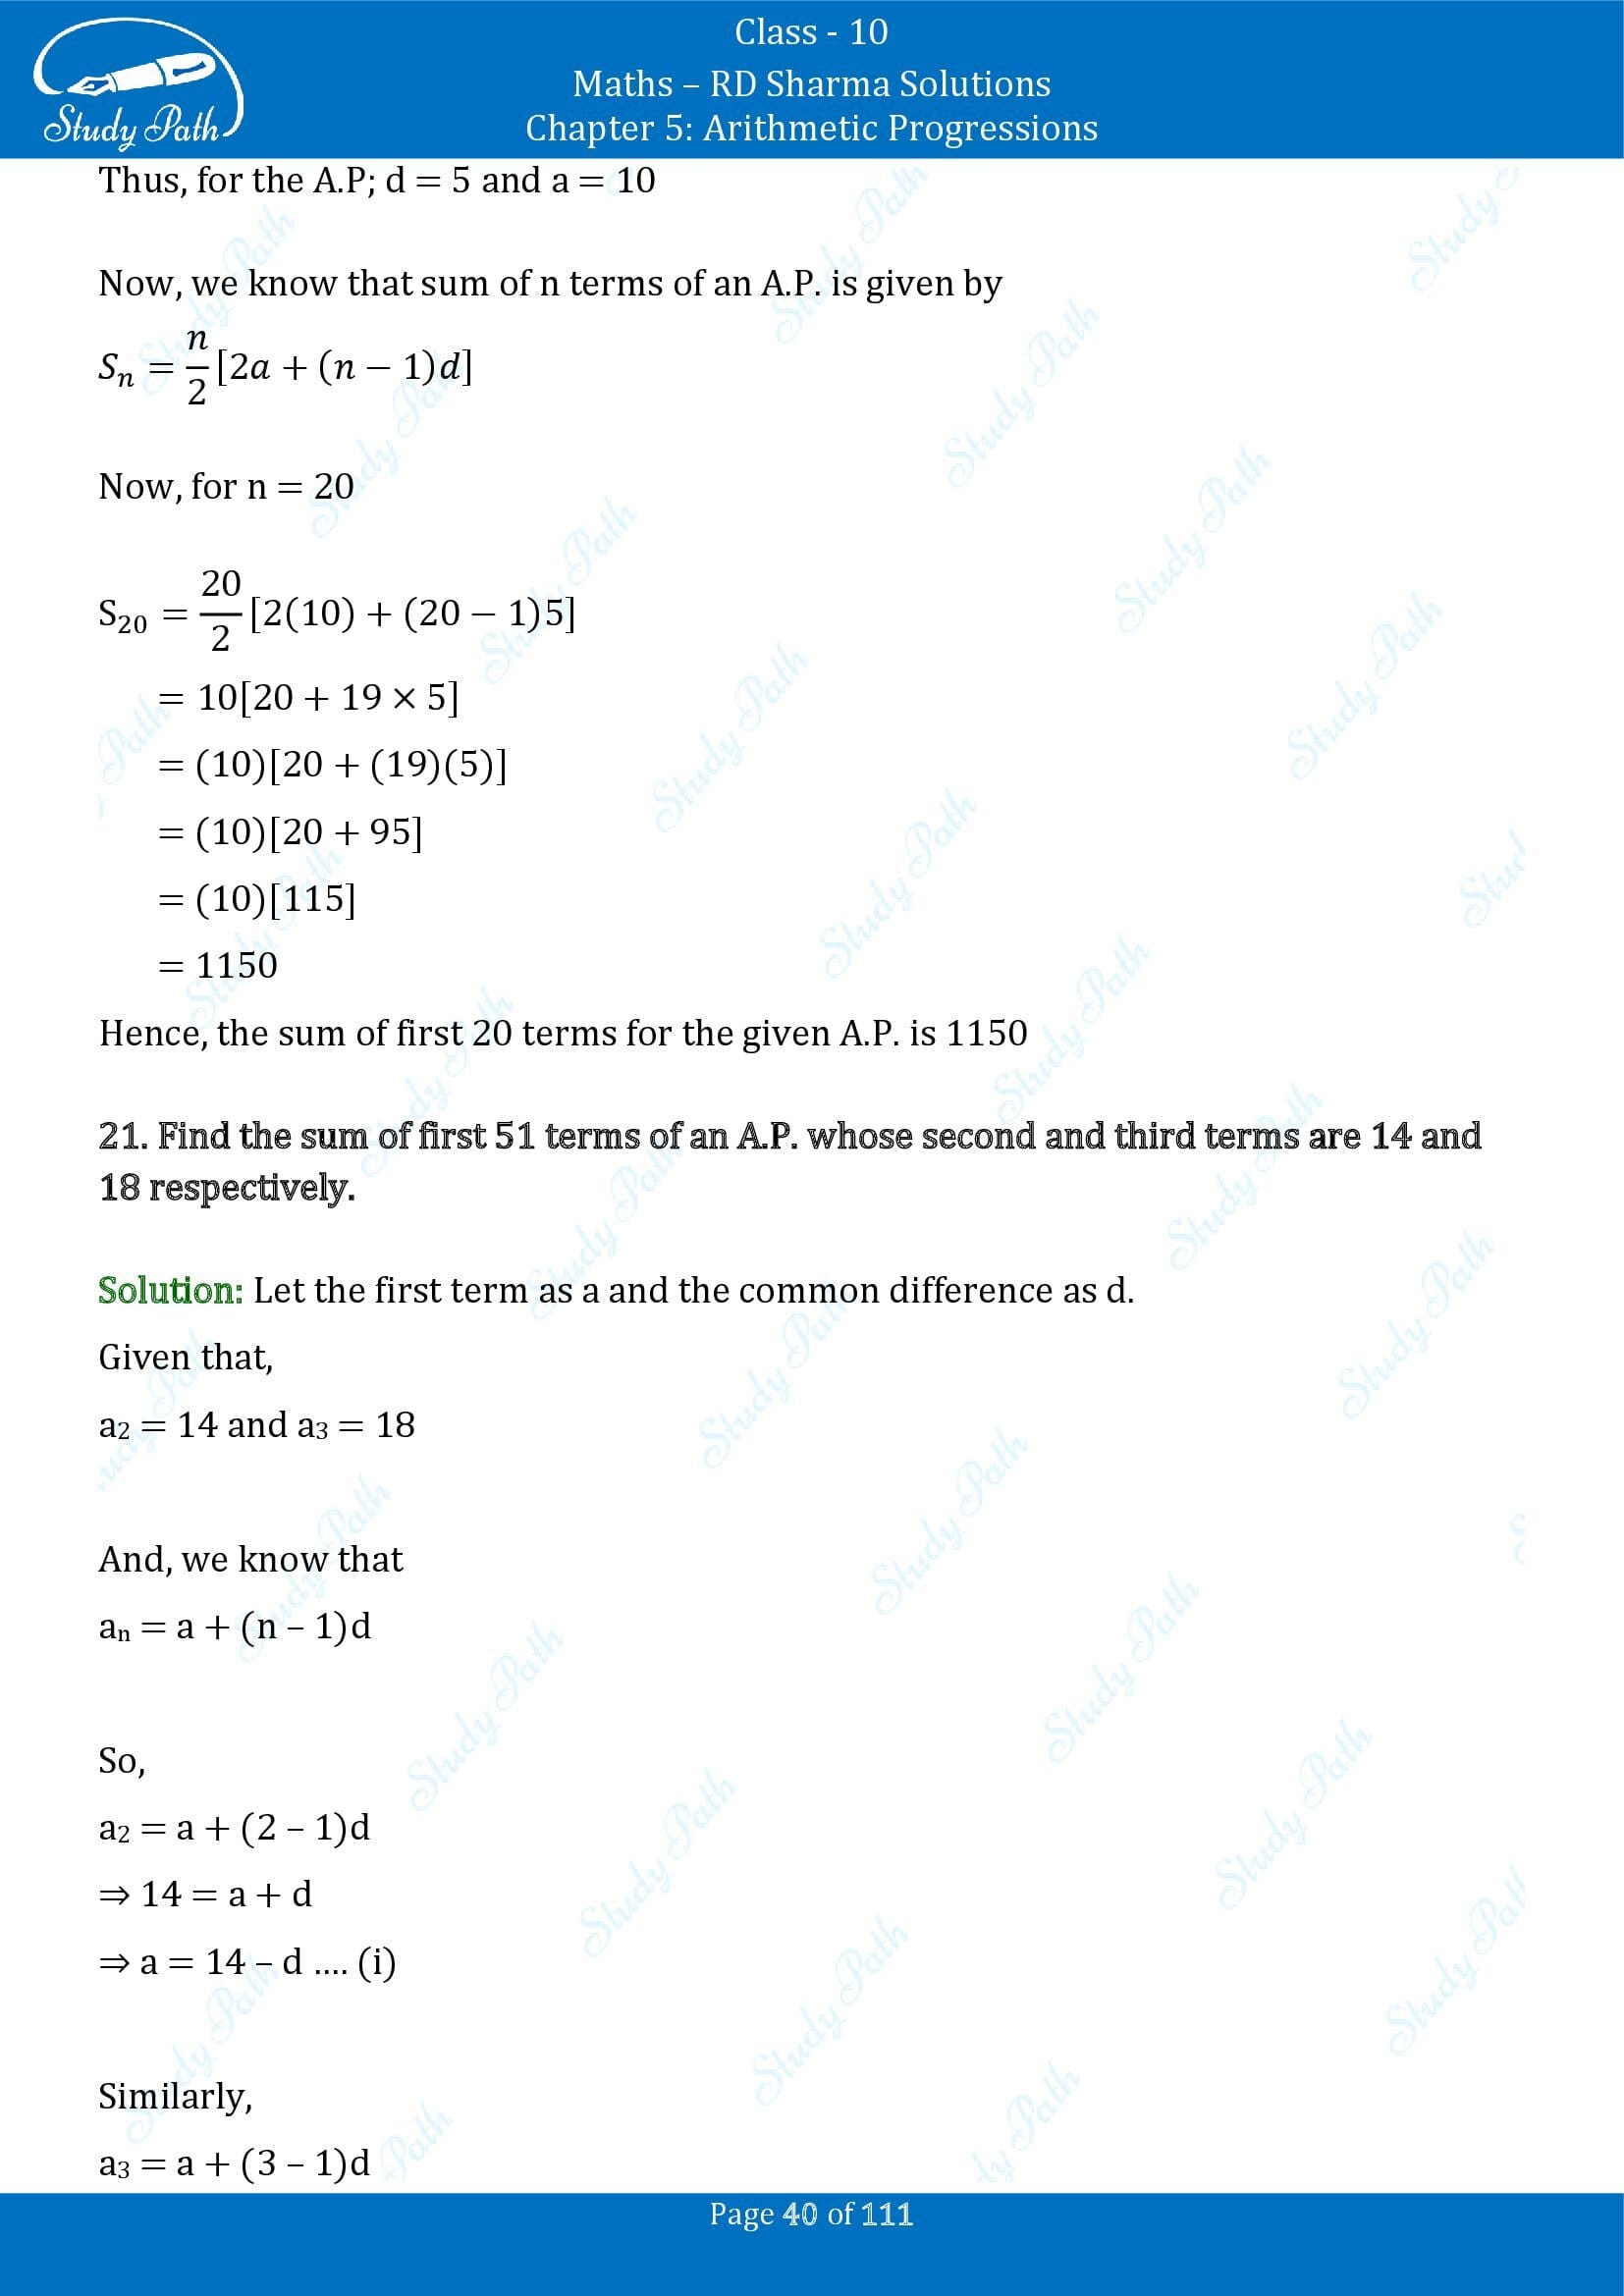 RD Sharma Solutions Class 10 Chapter 5 Arithmetic Progressions Exercise 5.6 00040